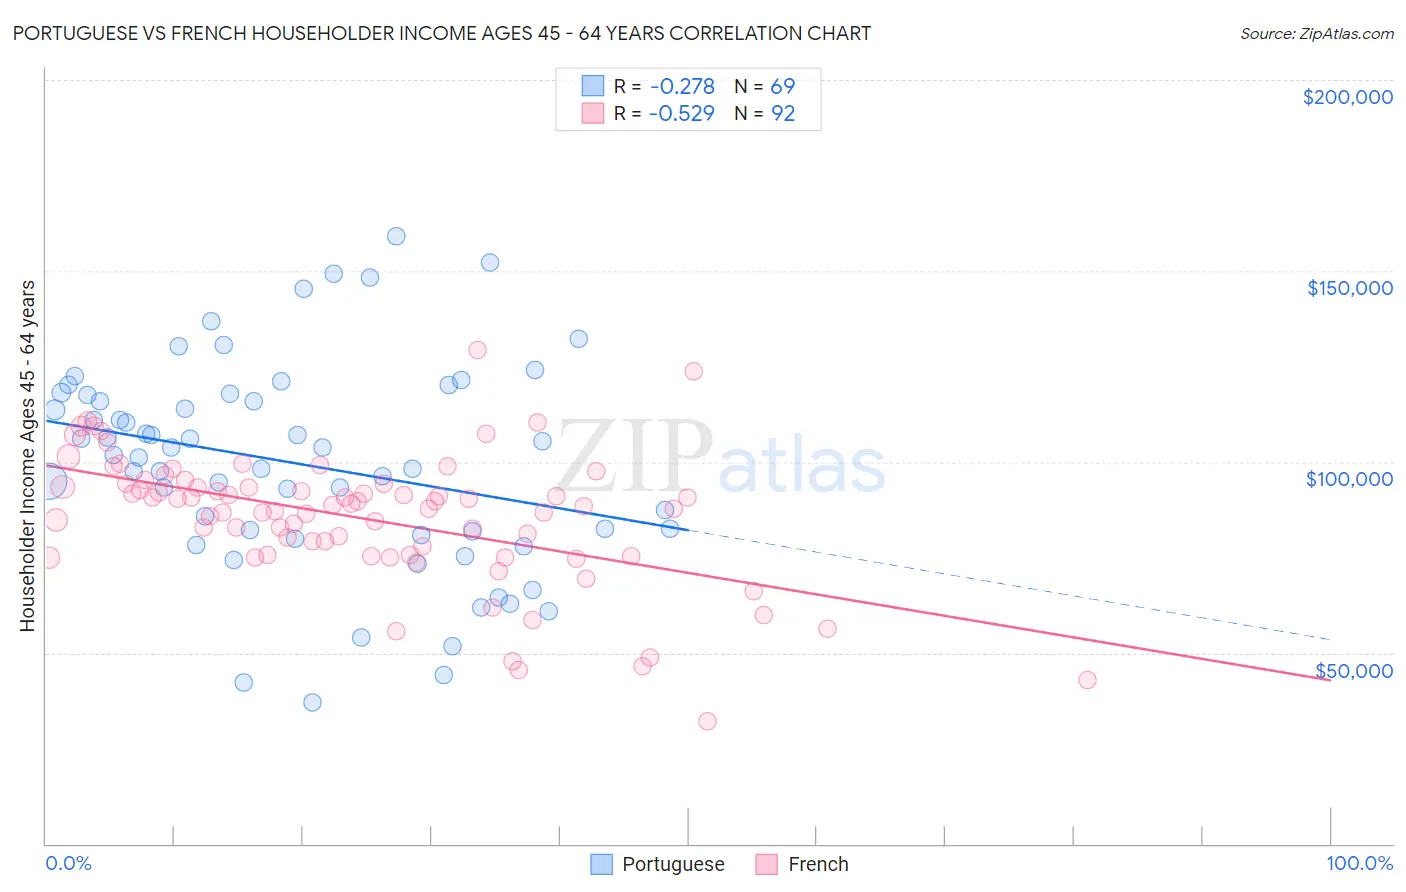 Portuguese vs French Householder Income Ages 45 - 64 years